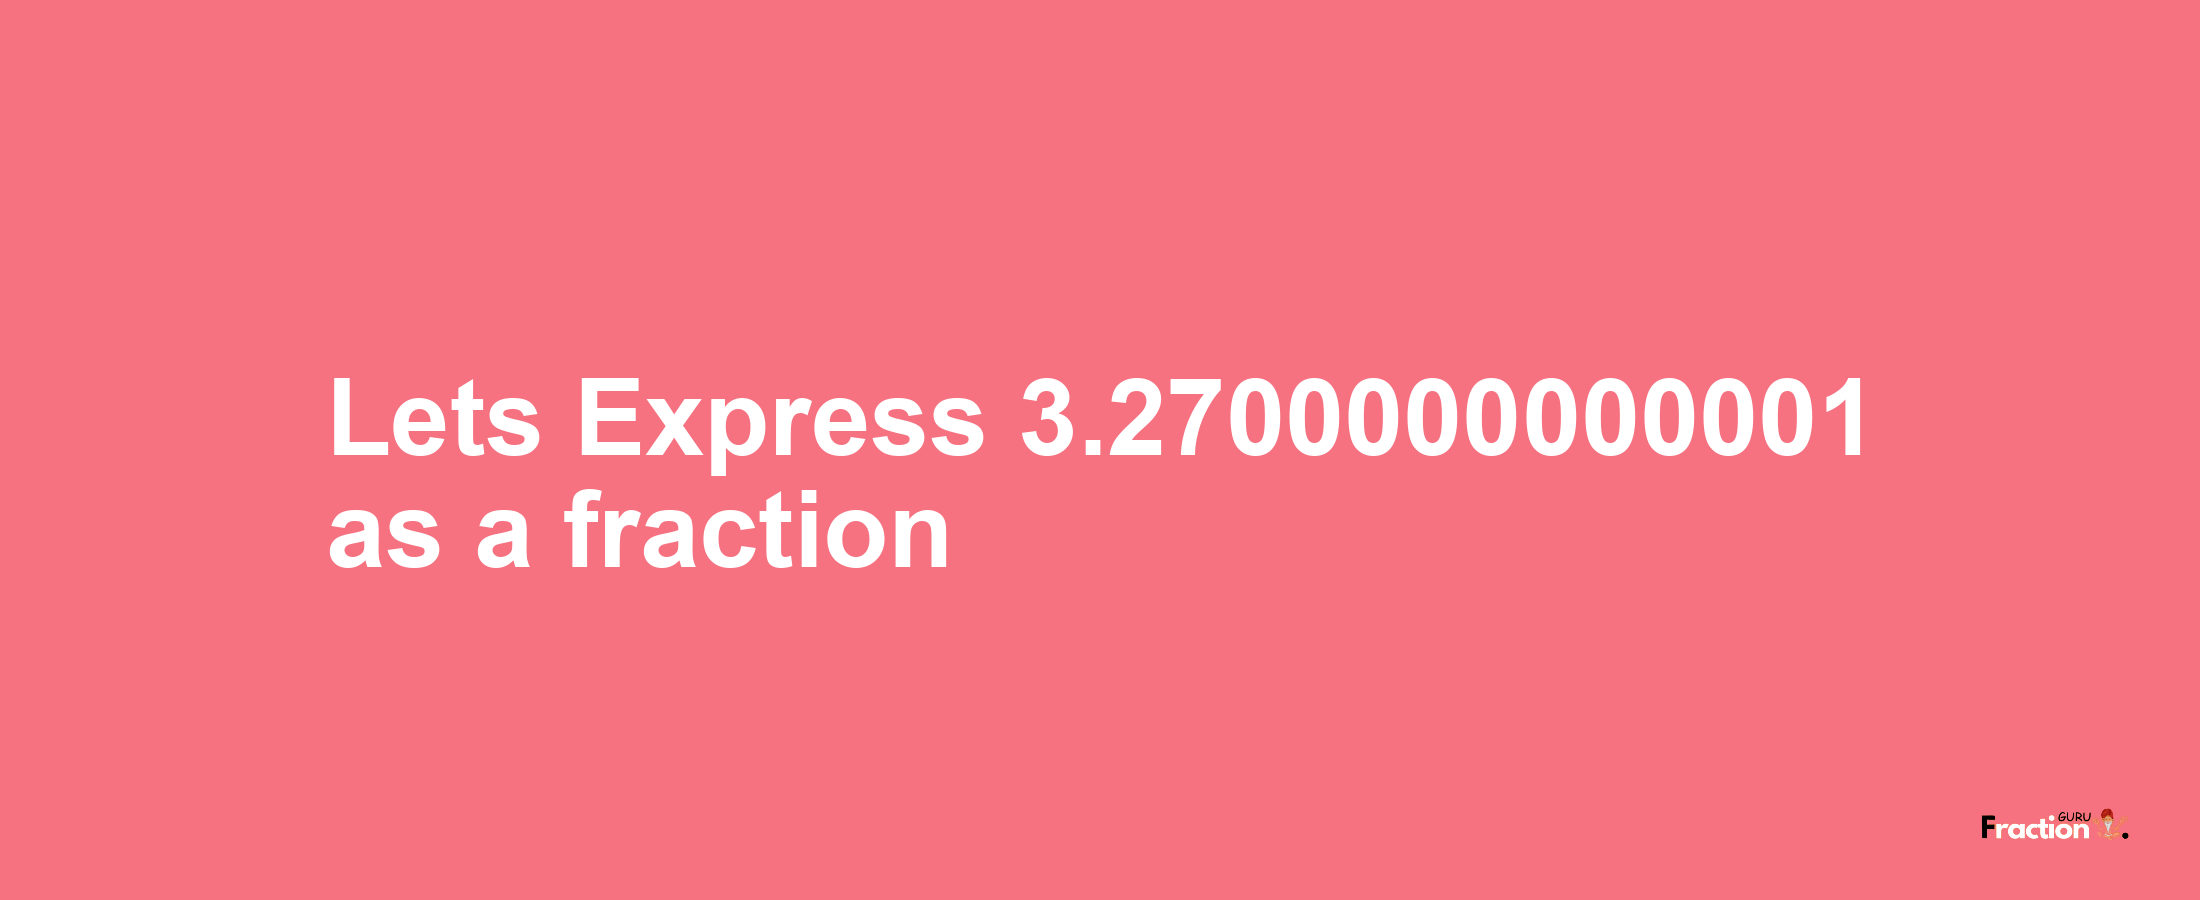 Lets Express 3.2700000000001 as afraction